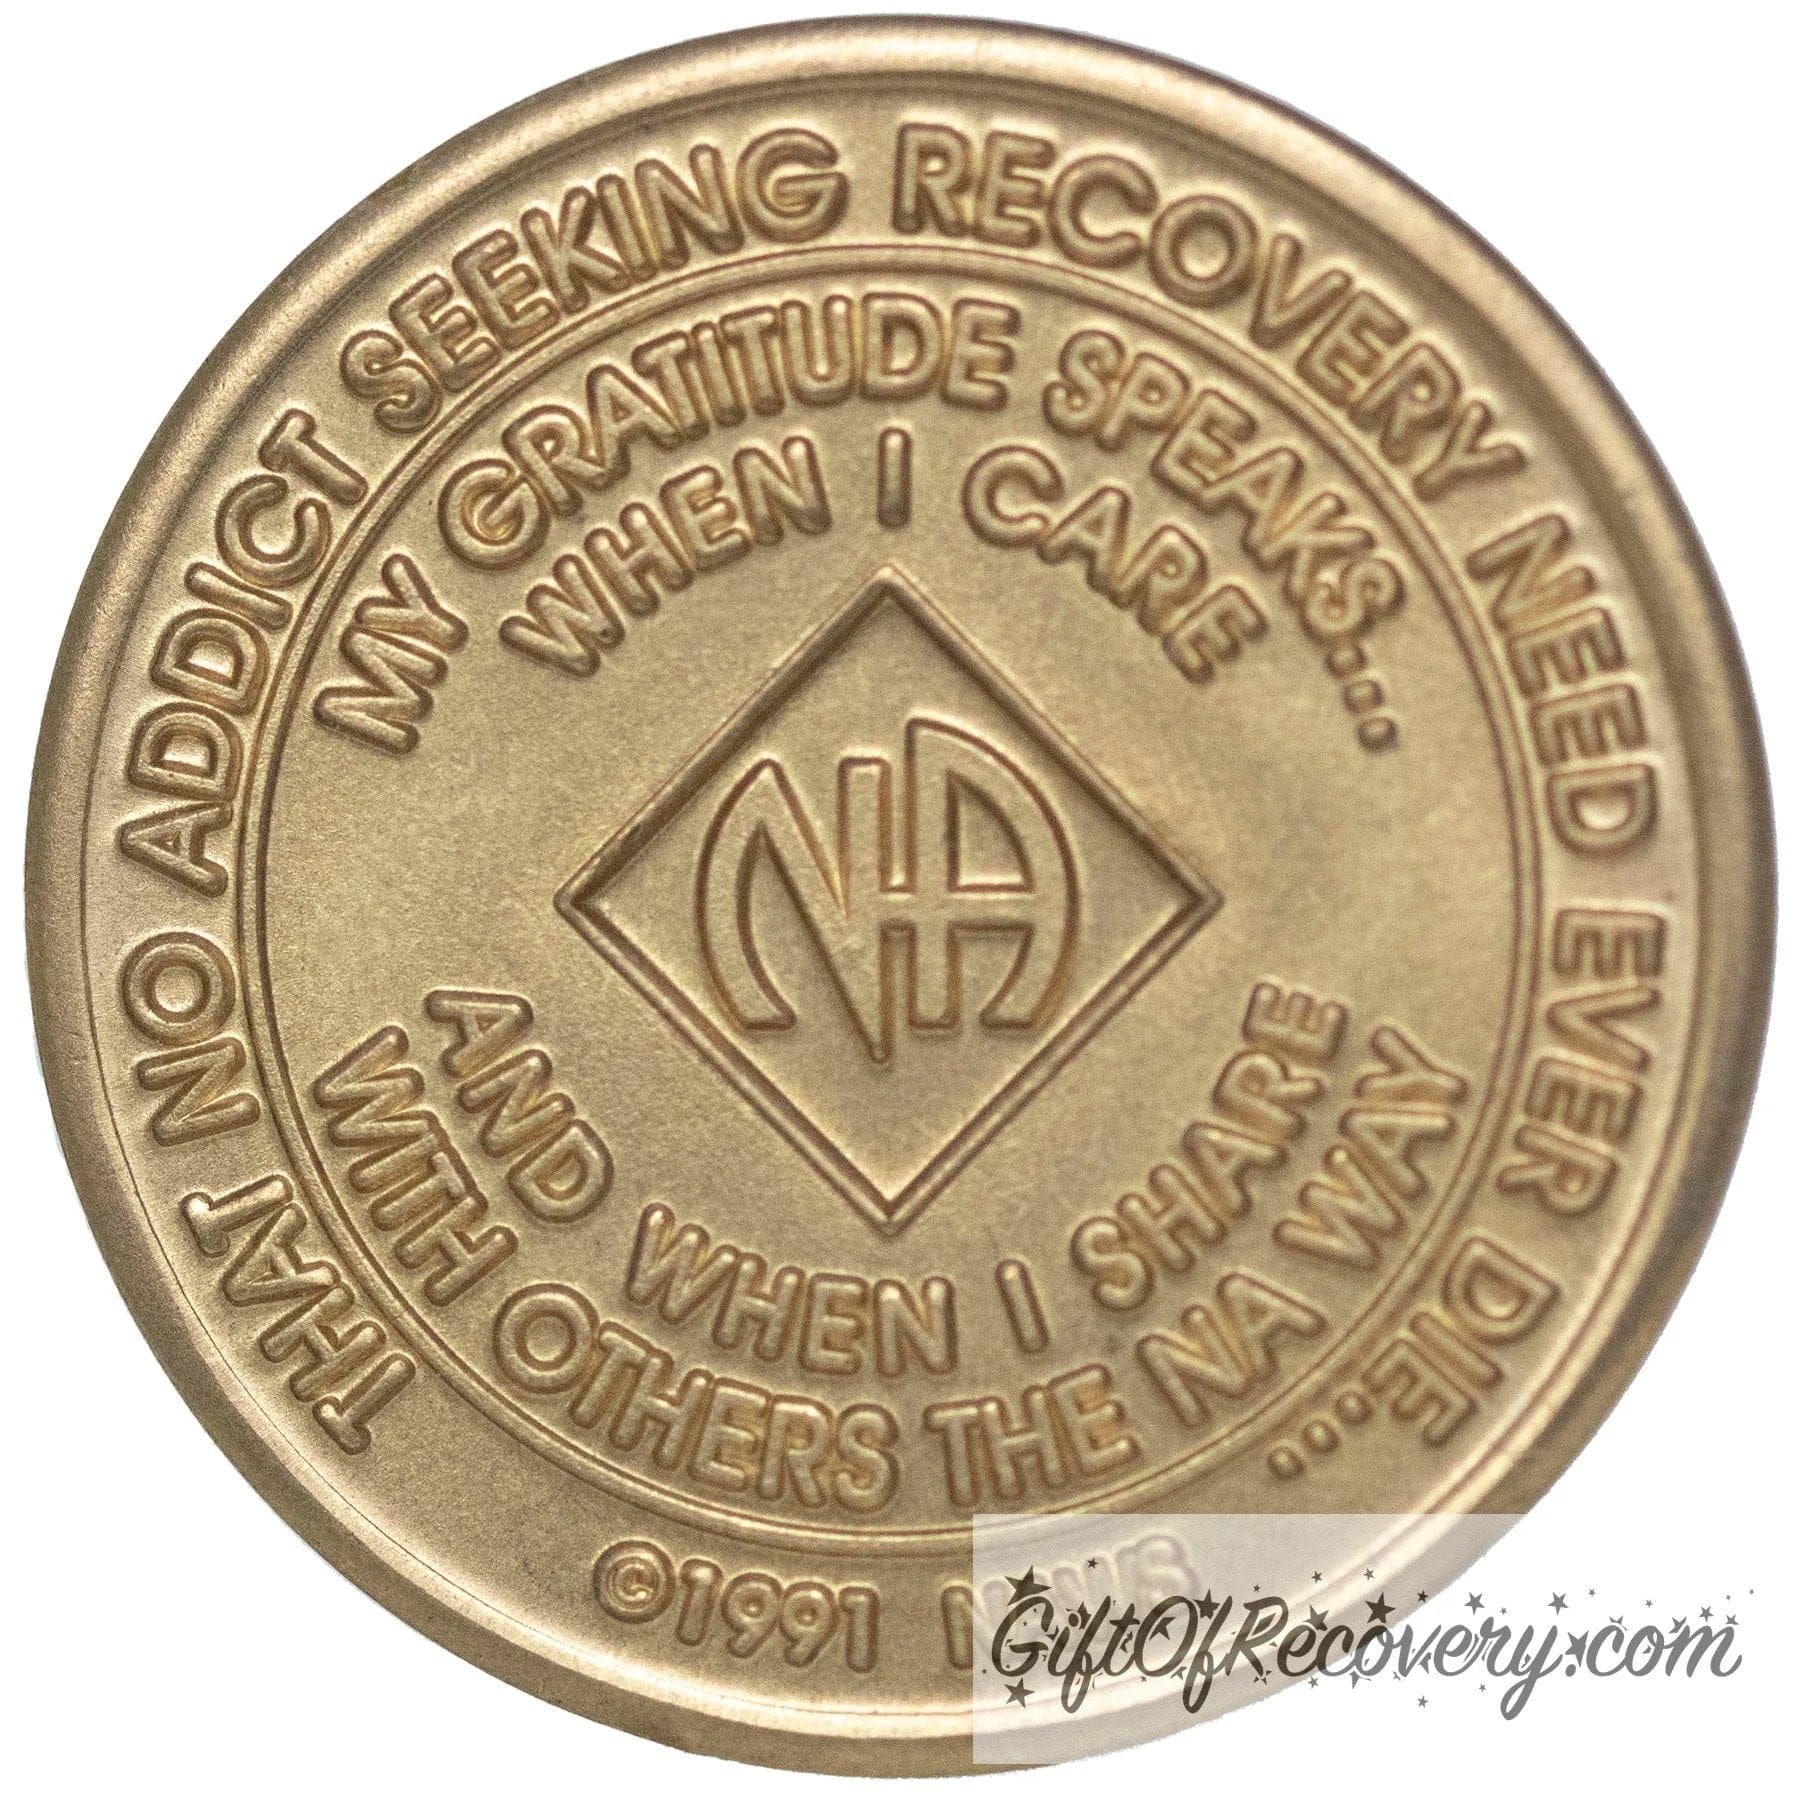 Clean Time Chip Narcotics Anonymous Bronze Crystalized Diamond